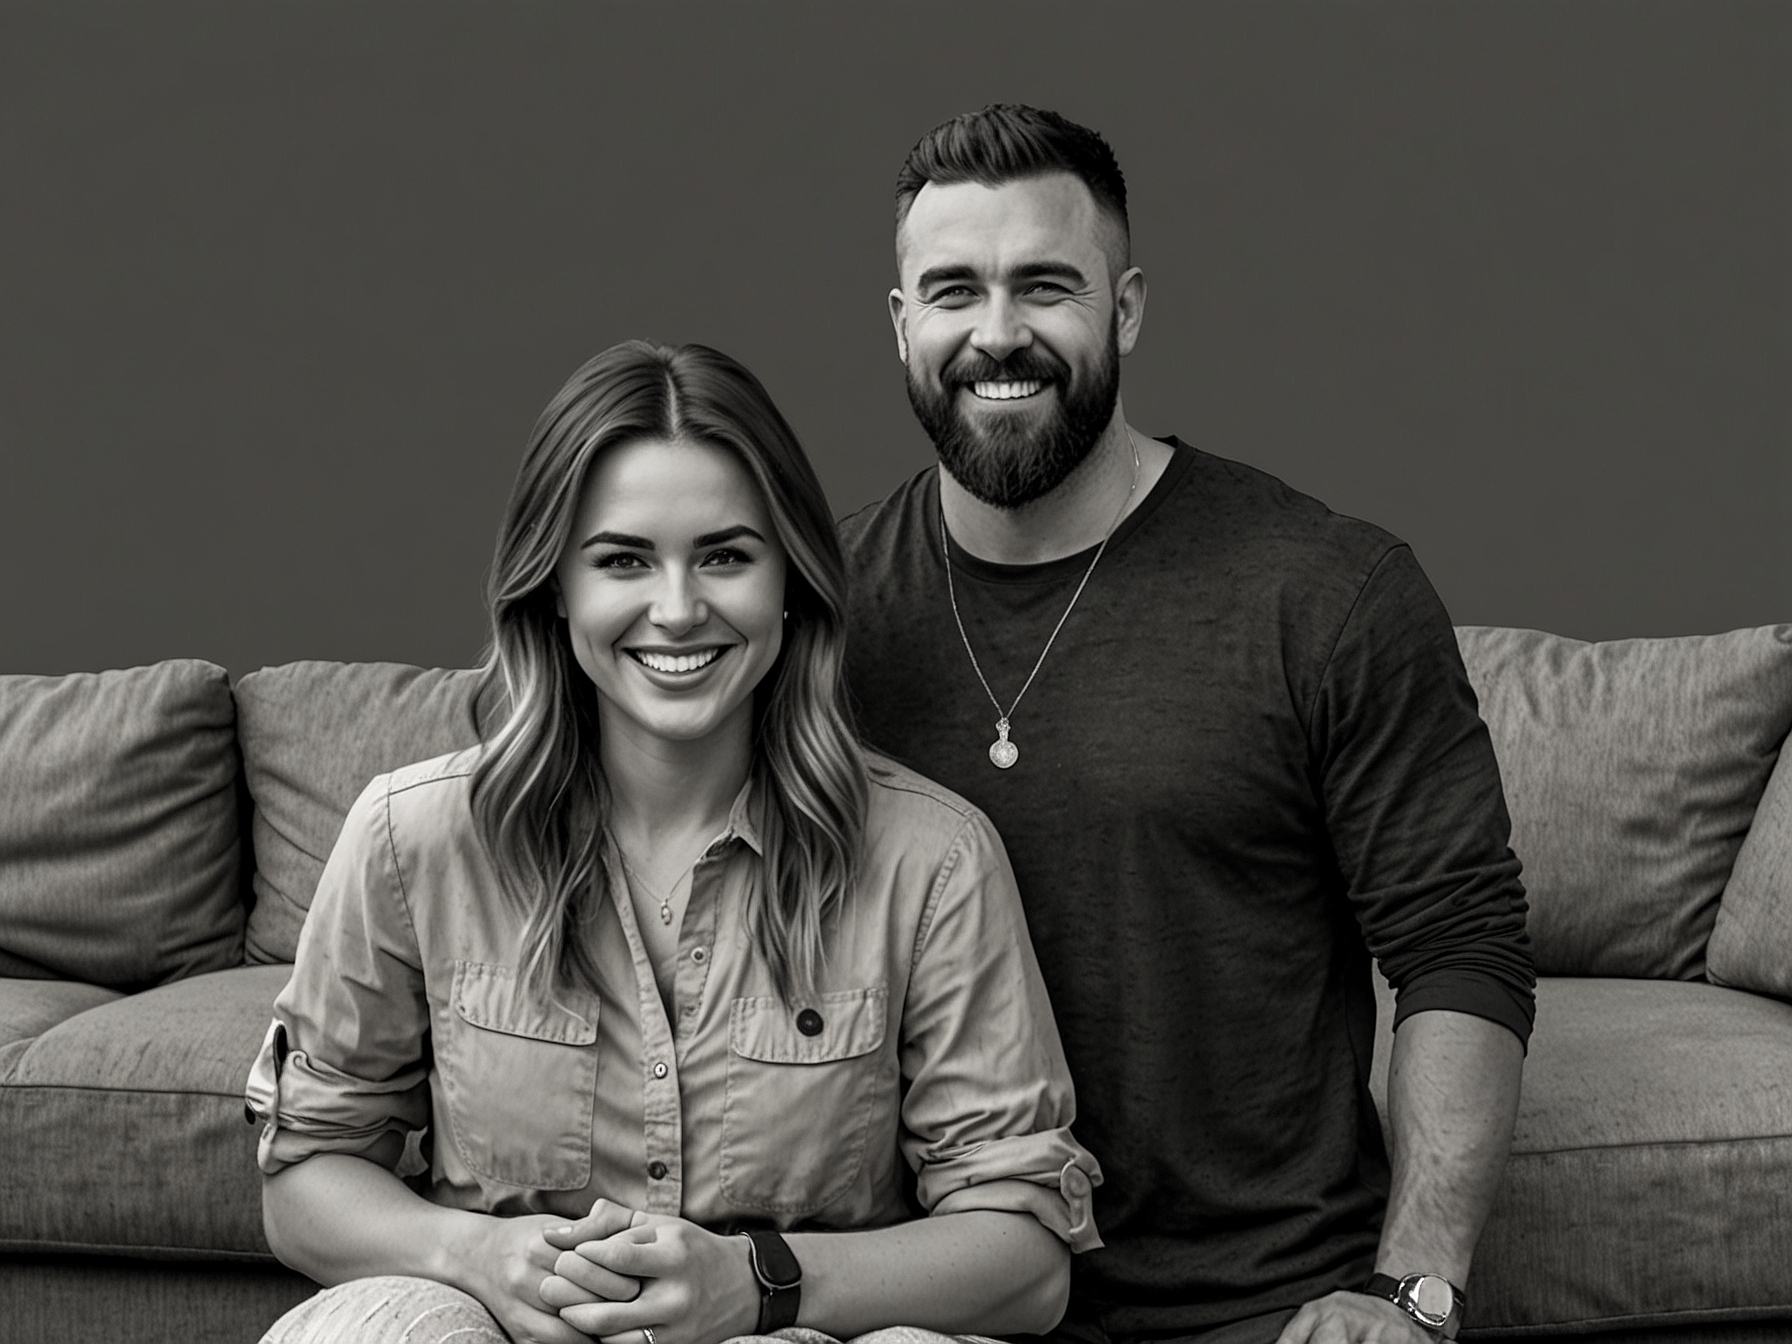 A happy family picture showing Jason and Kylie Kelce with their daughters Wyatt and Elliotte, symbolizing the private moments they aim to protect from public scrutiny.